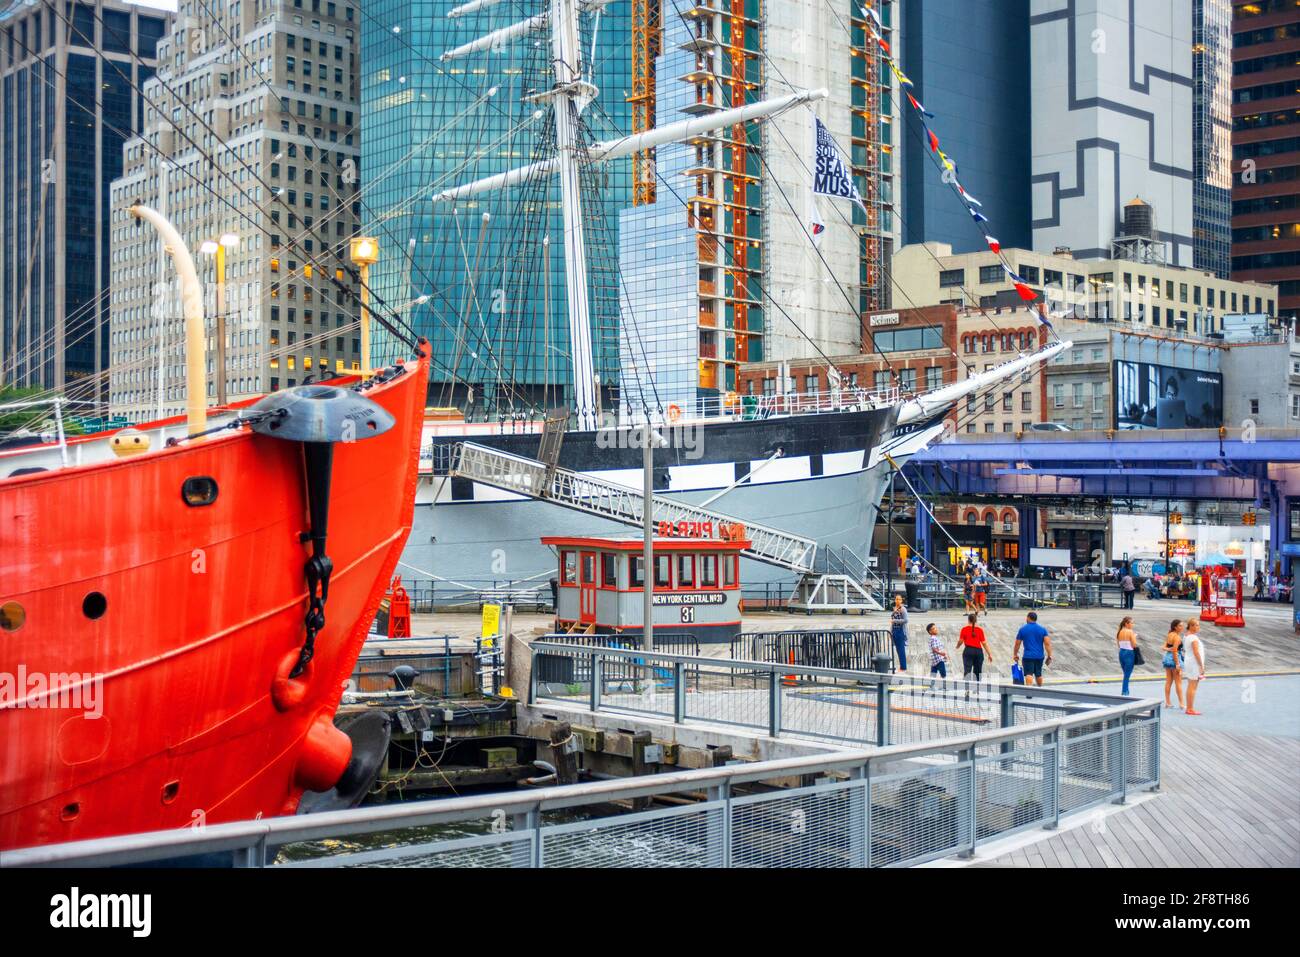 Pier 16 and Ambrose ship. Harbour South Street Seaport district, Lower Manhattan, New York City, NY, USA Stock Photo